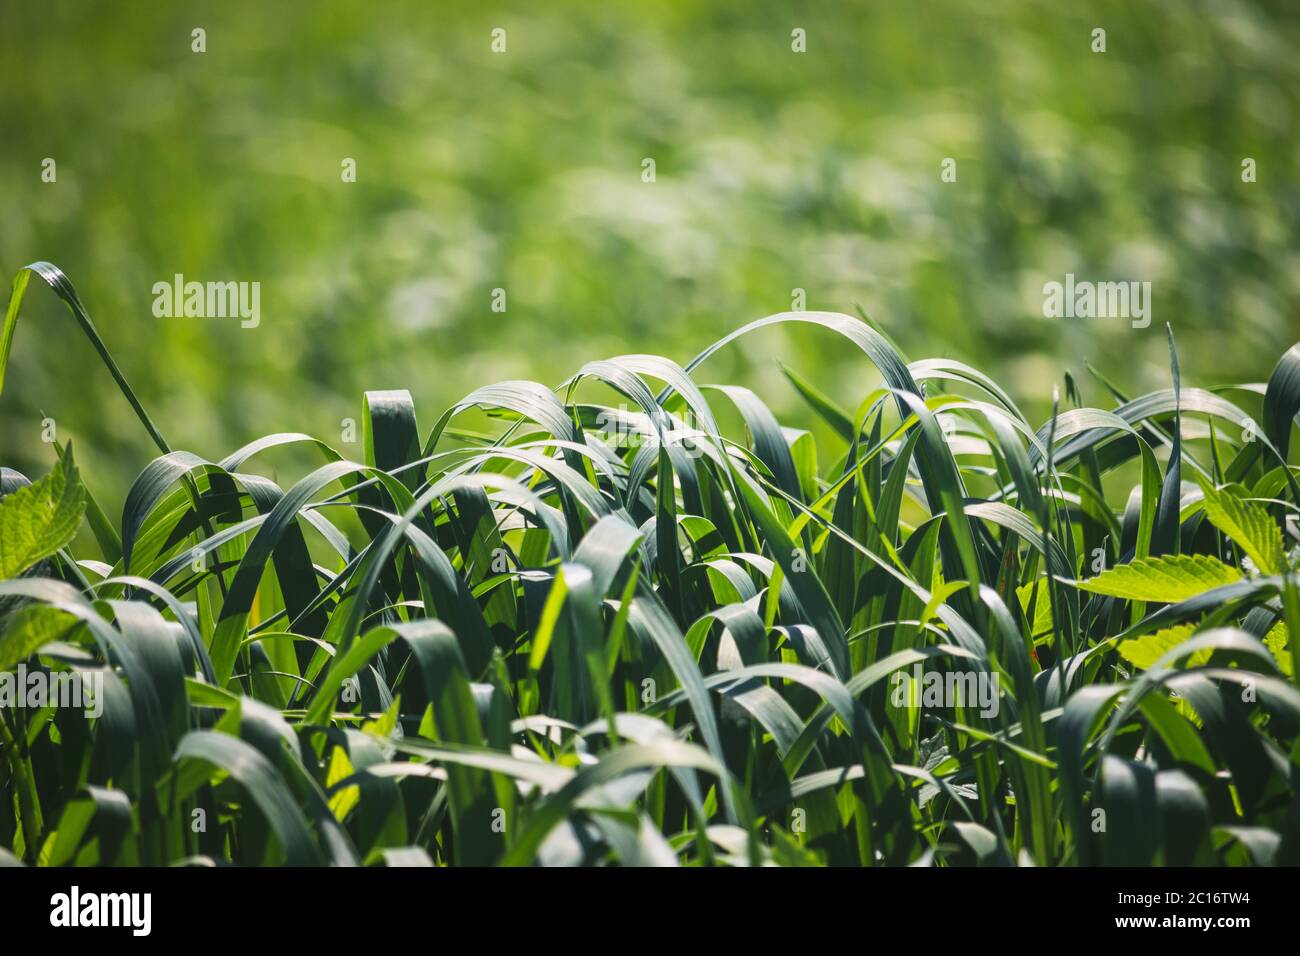 meadow with long bent green grass - close up view Stock Photo